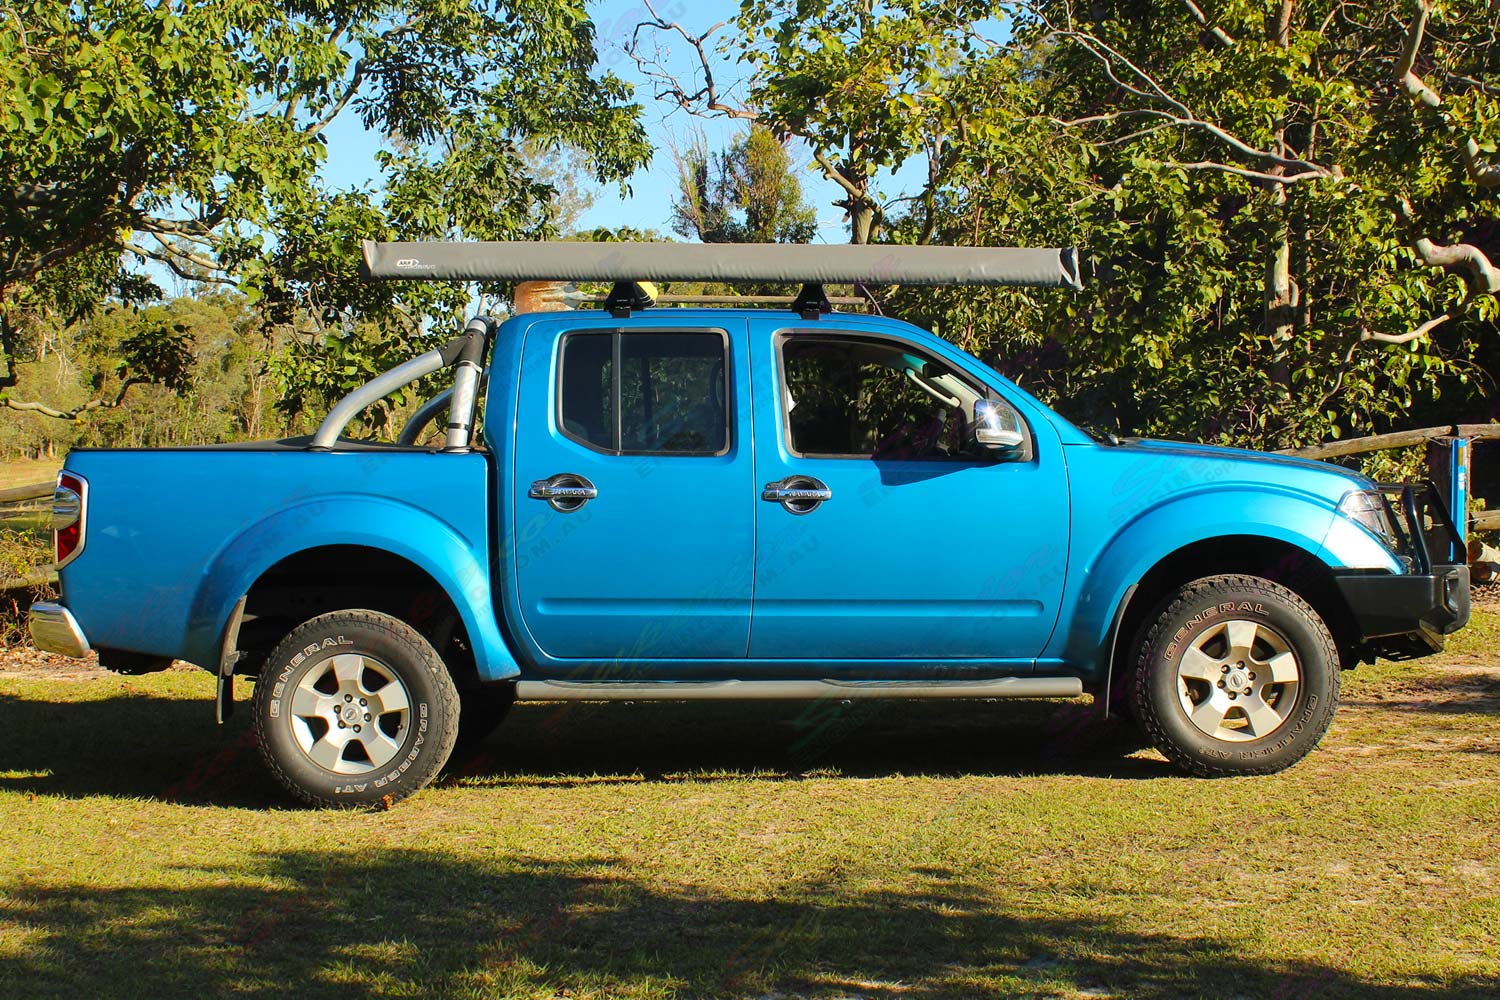 Right side view of a blue D40 Nissan Navara dual cab fitted with a 40mm Tough Dog lift kit, Ironman 4x4 bullbar & underbody protection